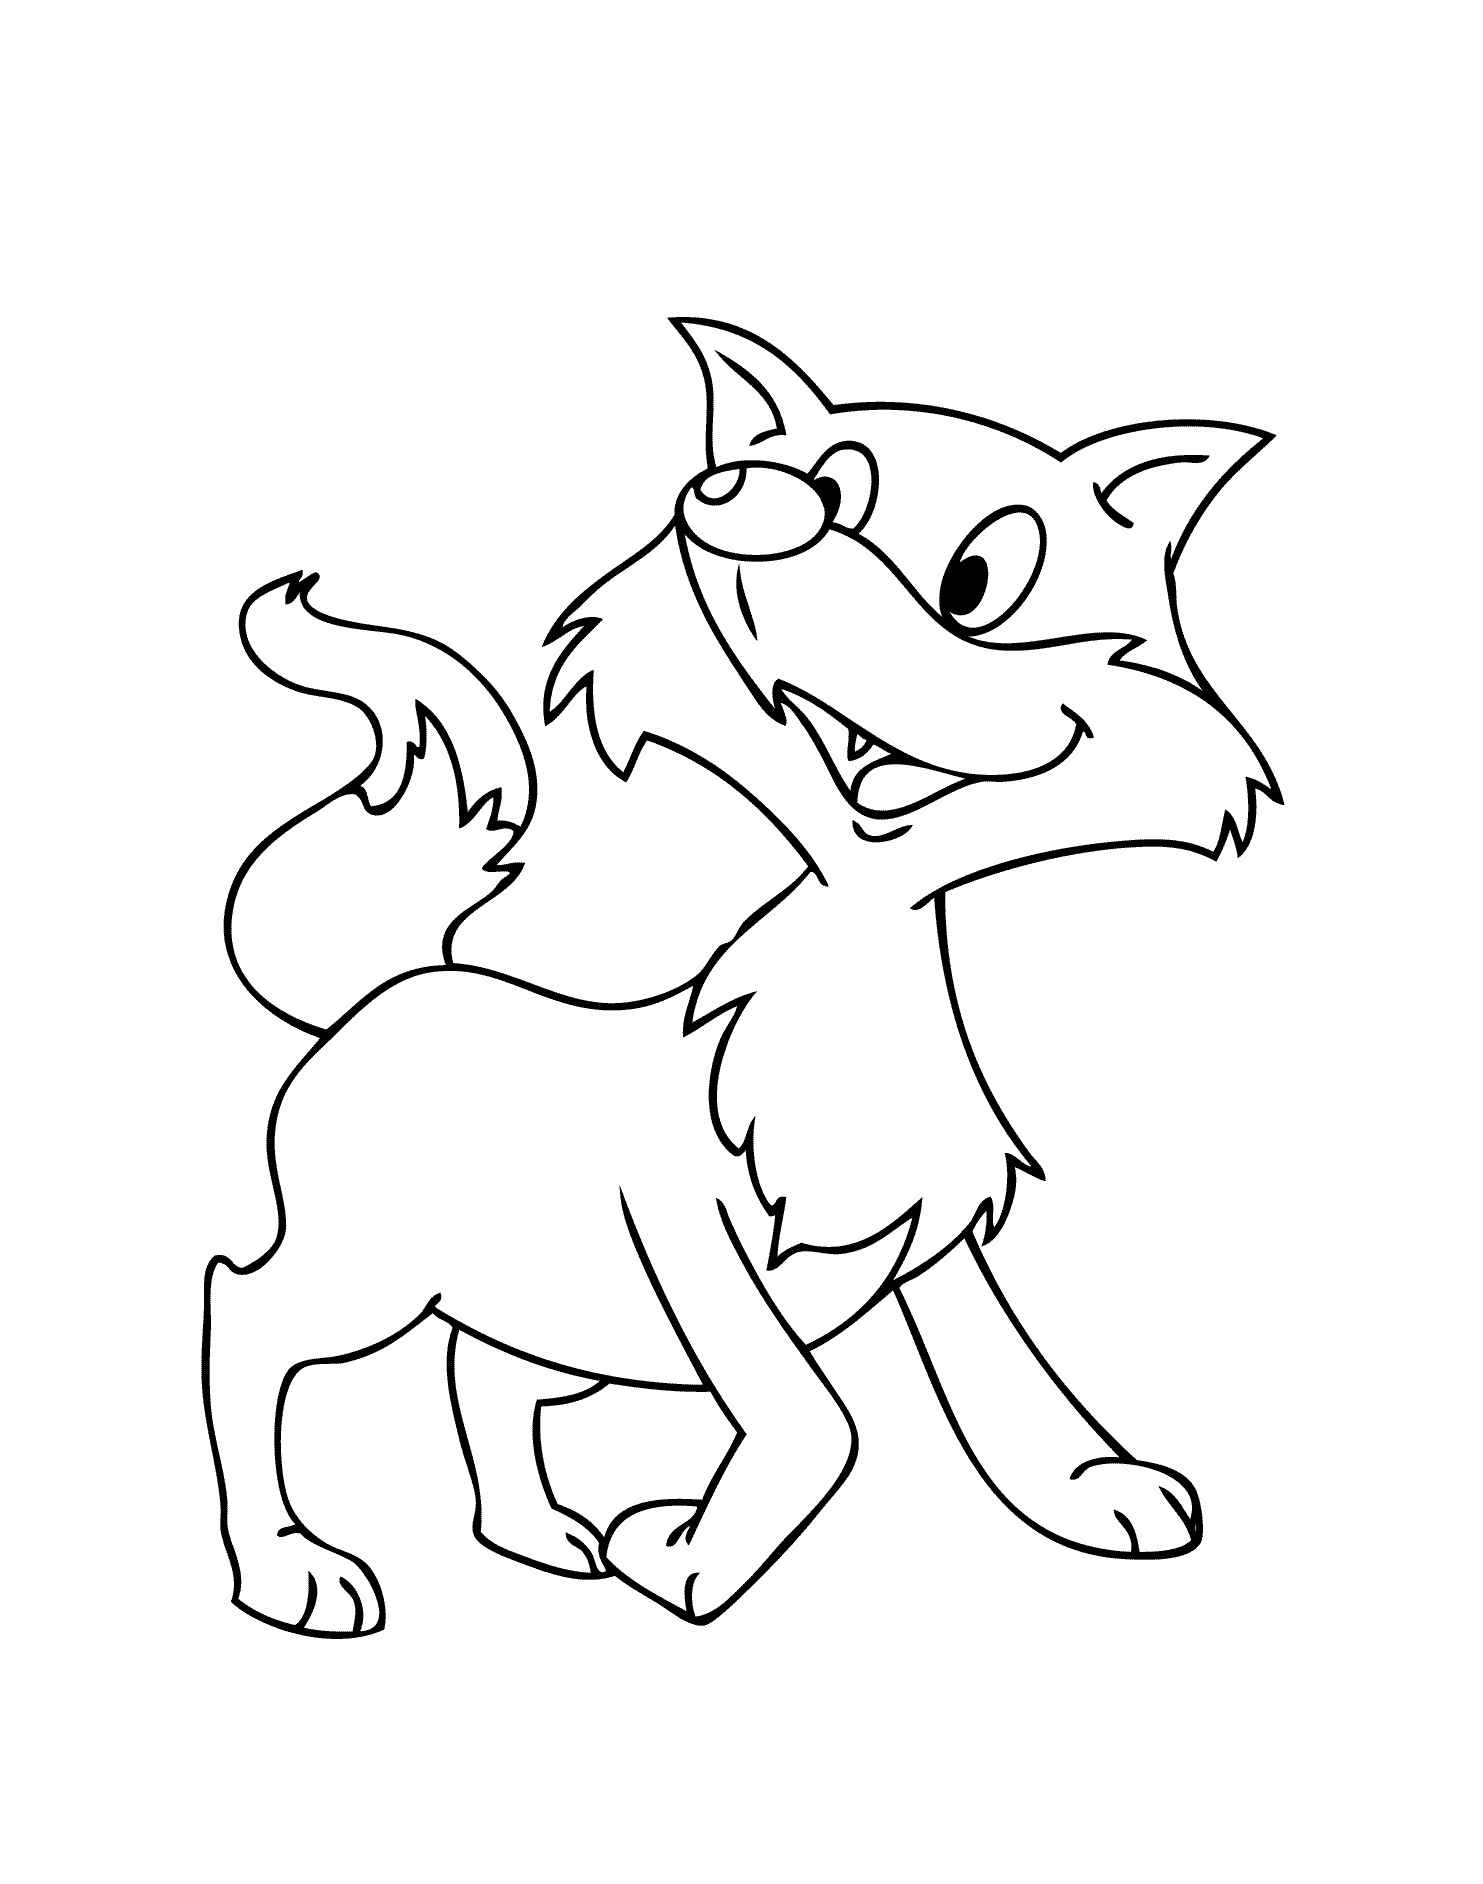 Animals Coloring Pages For Kids
 Animal coloring sheets for kids Coloring pages for kids